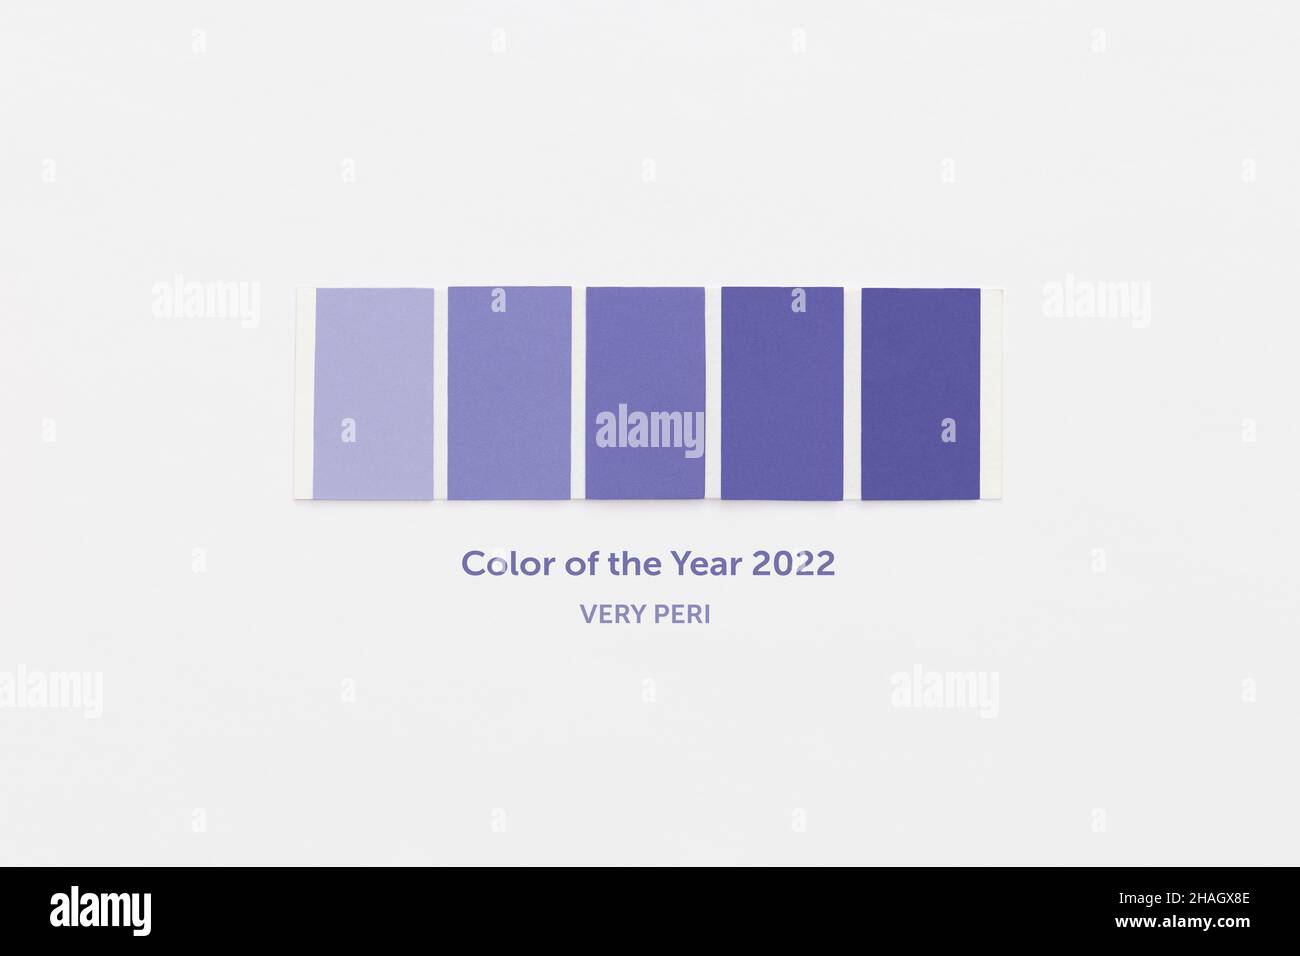 Color swatch with color of the year 2022 - Very Peri. Color trend palette. Top view, flat lay. Stock Photo